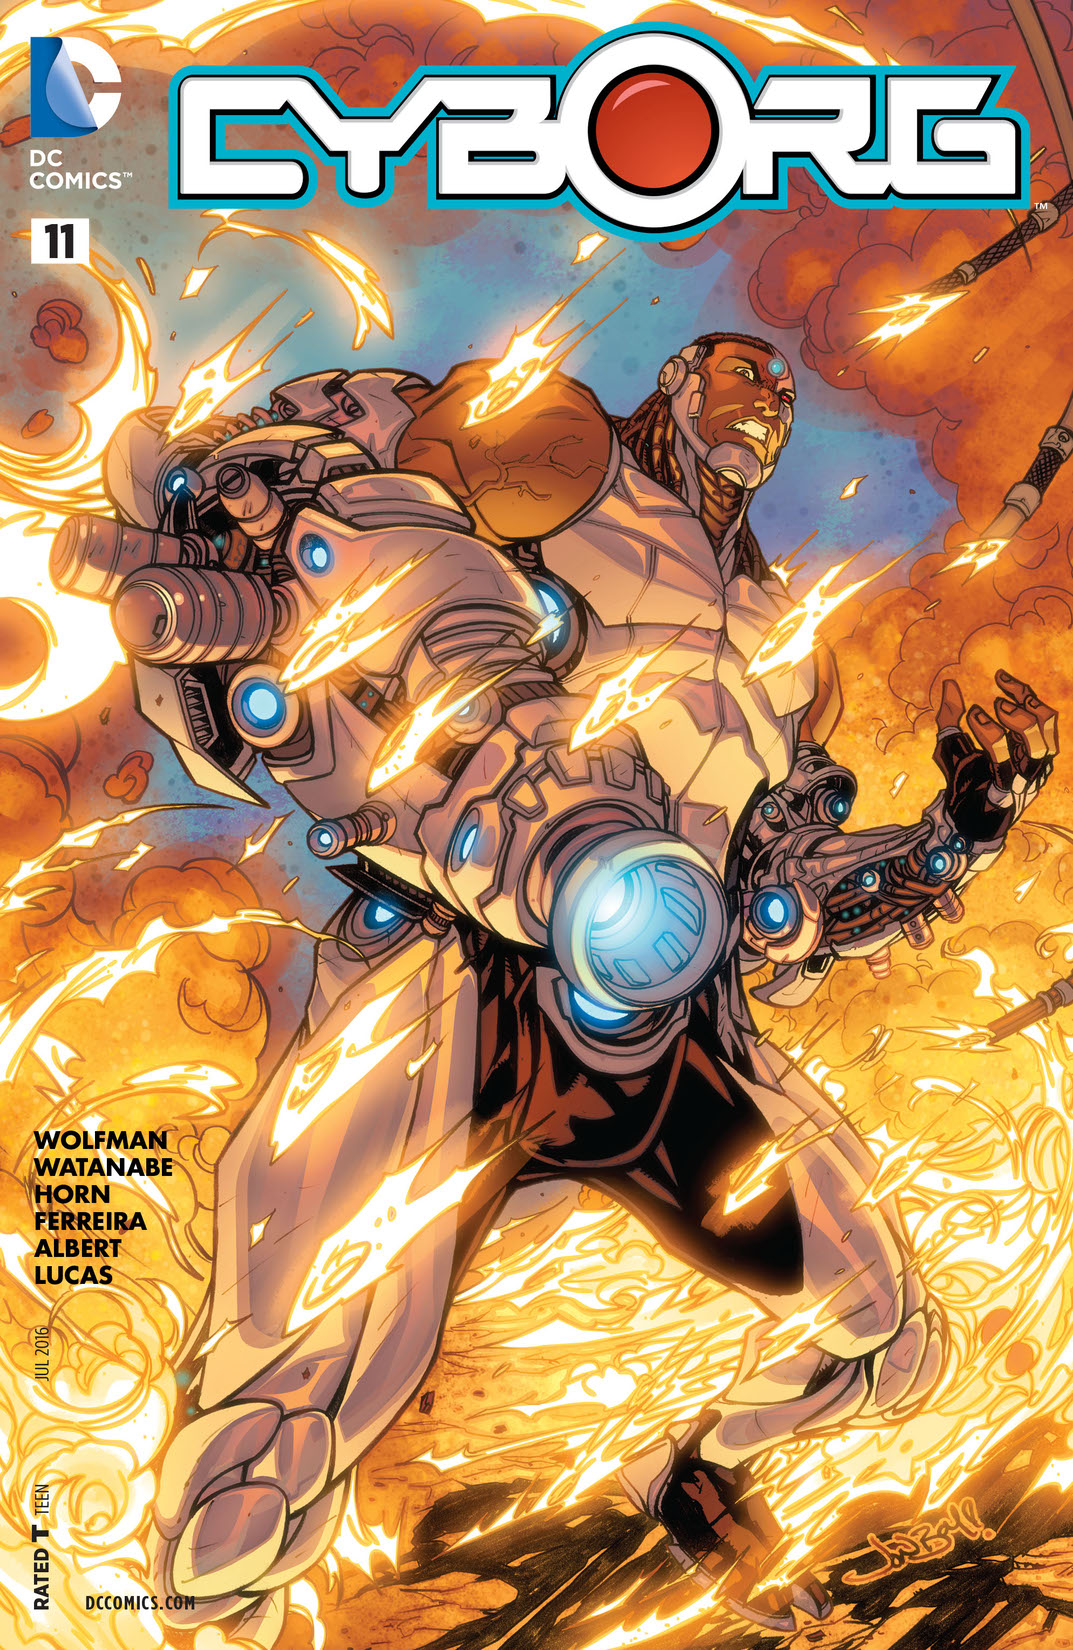 Cyborg (2015-) #11 preview images